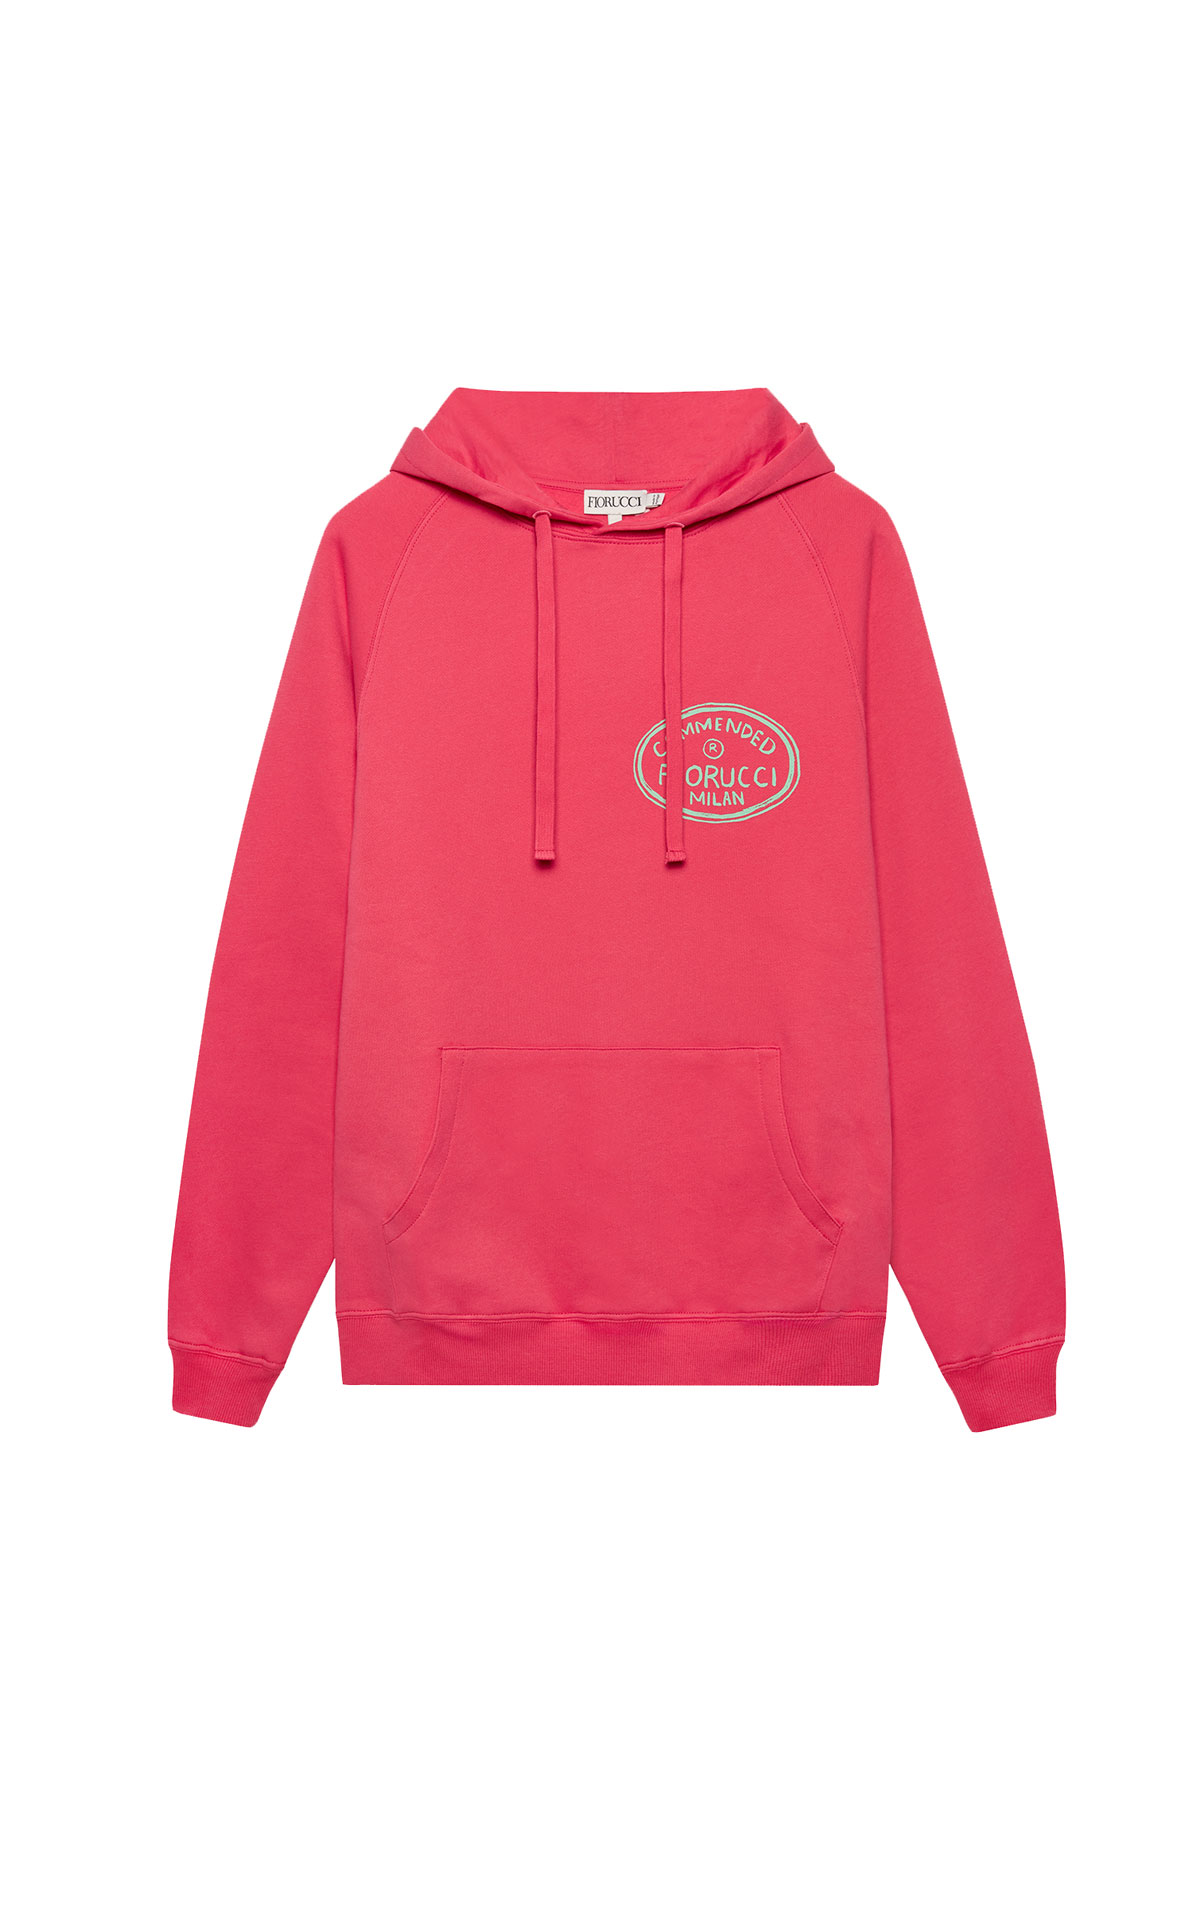 Fiorucci Unisex commended hoodie pink from Bicester Village